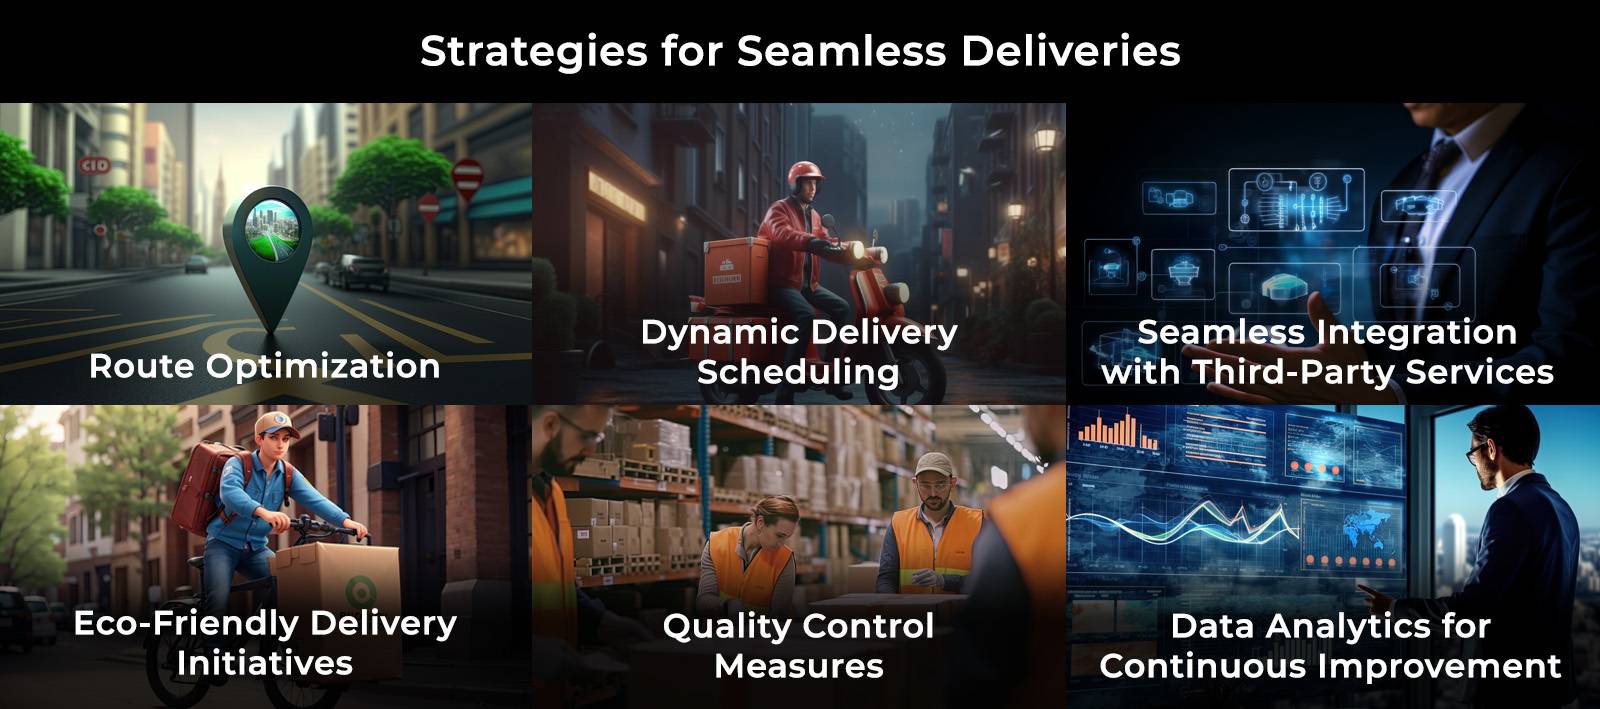 How does delivery management software offer seamless deliveries